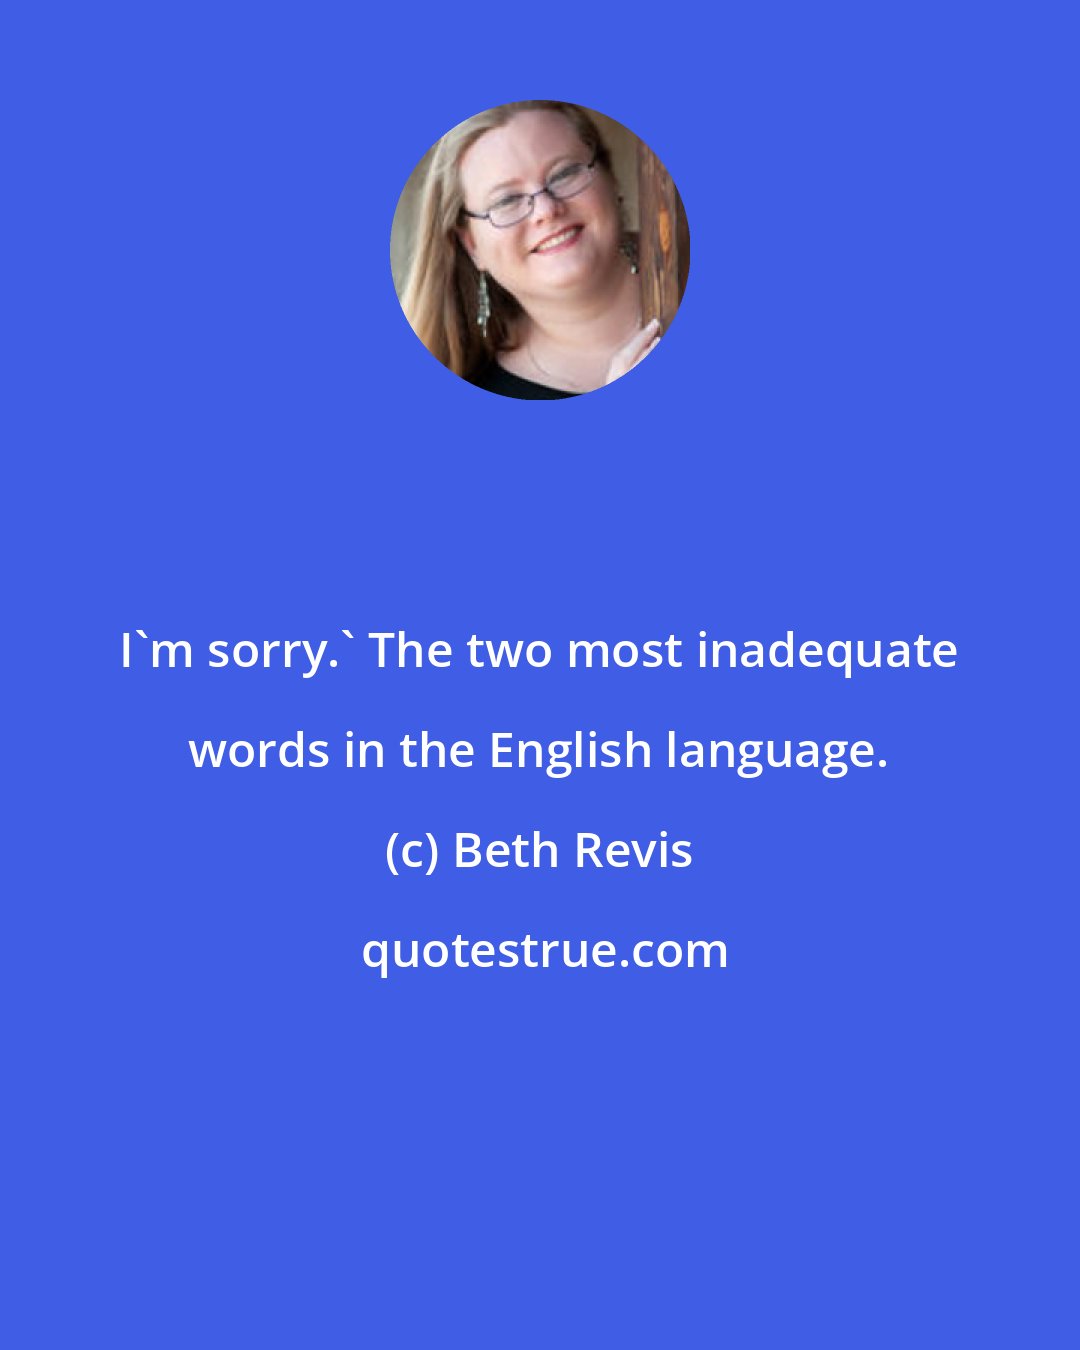 Beth Revis: I'm sorry.' The two most inadequate words in the English language.